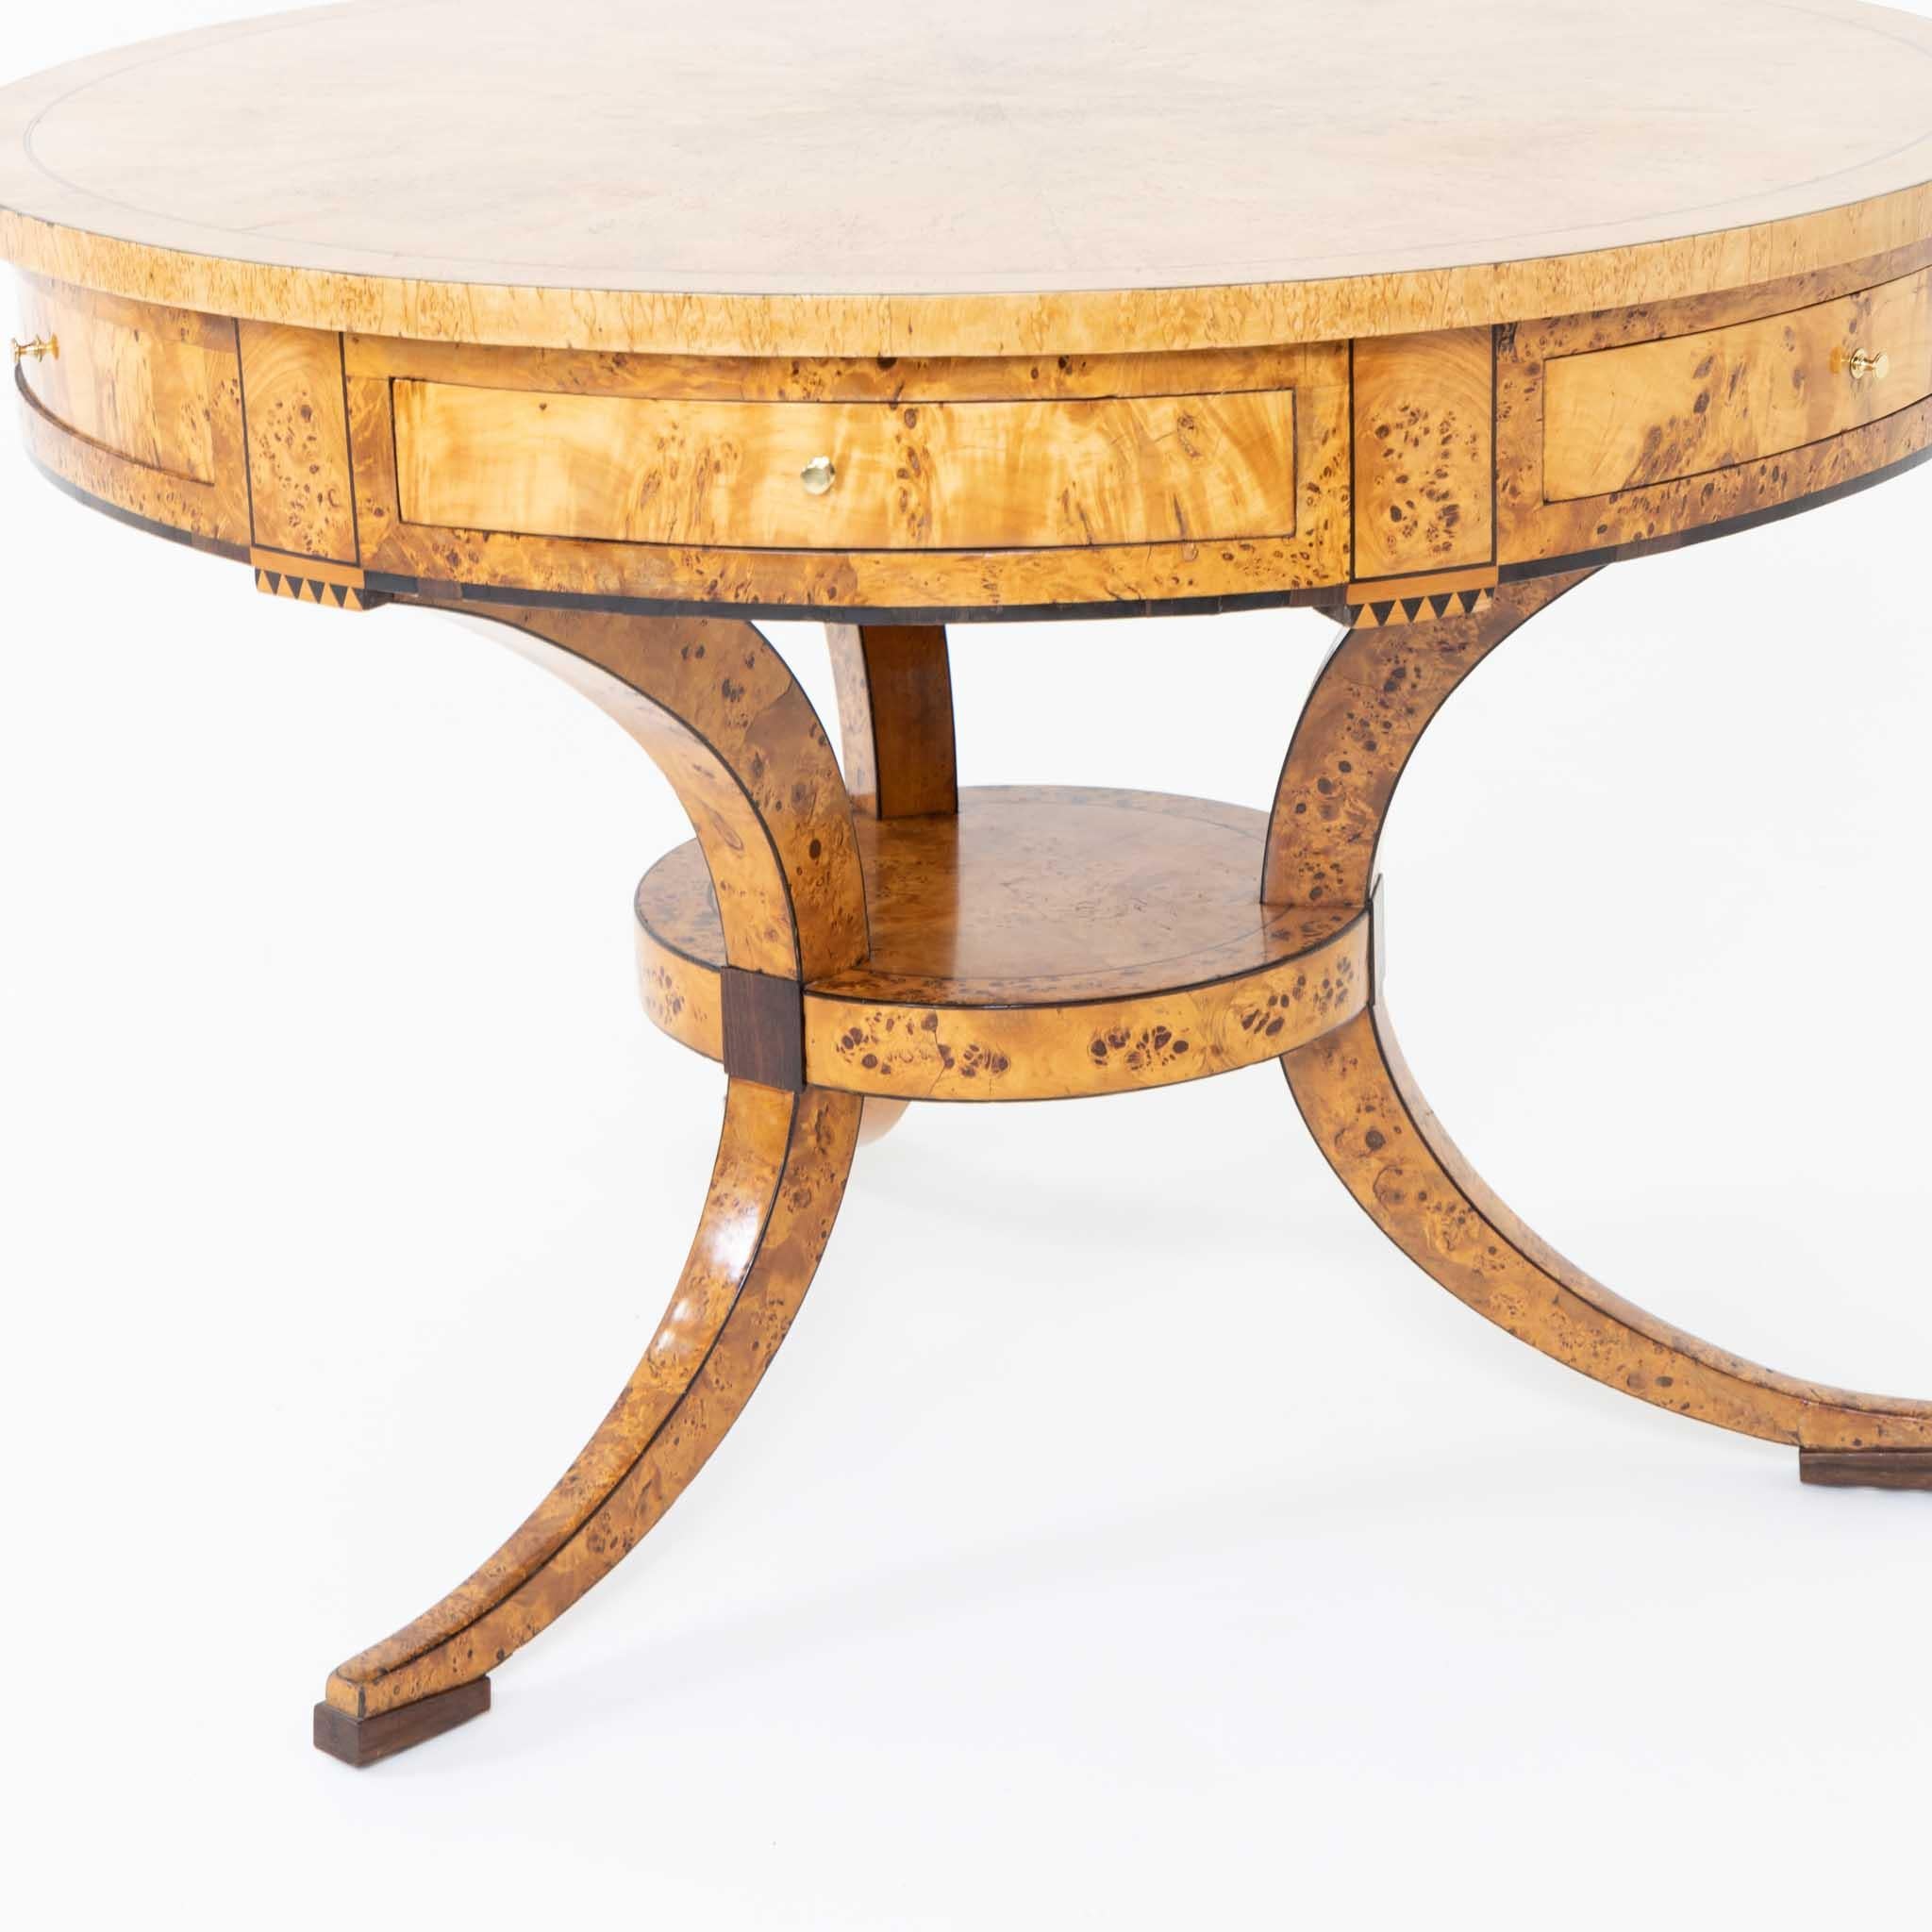 Biedermeier Game Table in Birch, Baltic States, early 19th Century For Sale 3